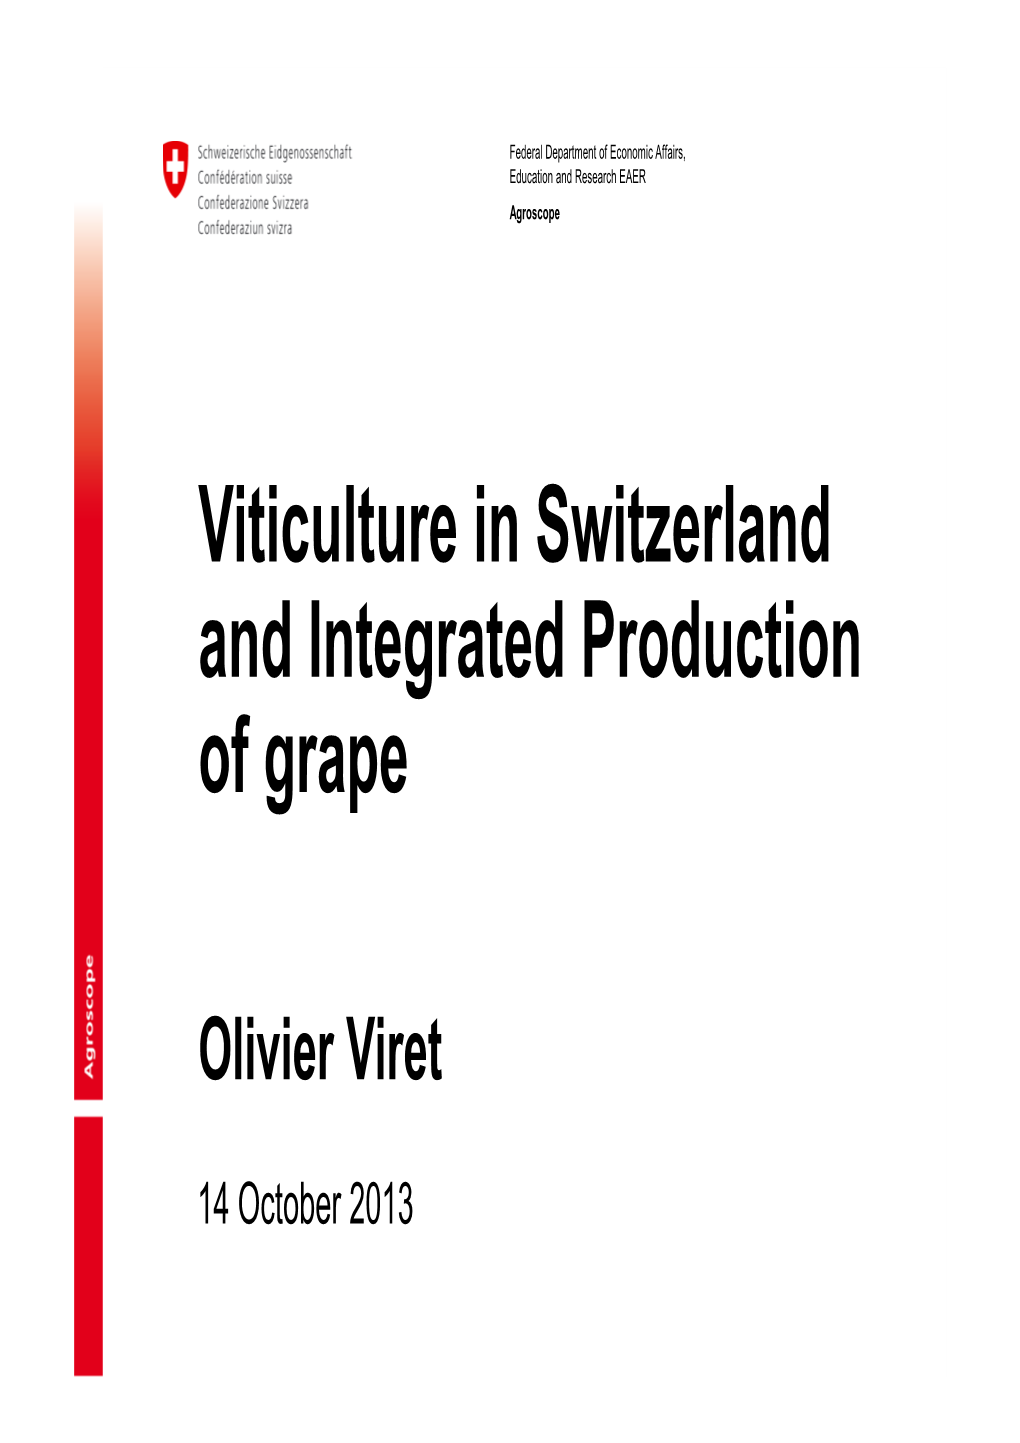 Viticulture in Switzerland and Integrated Production of Grape